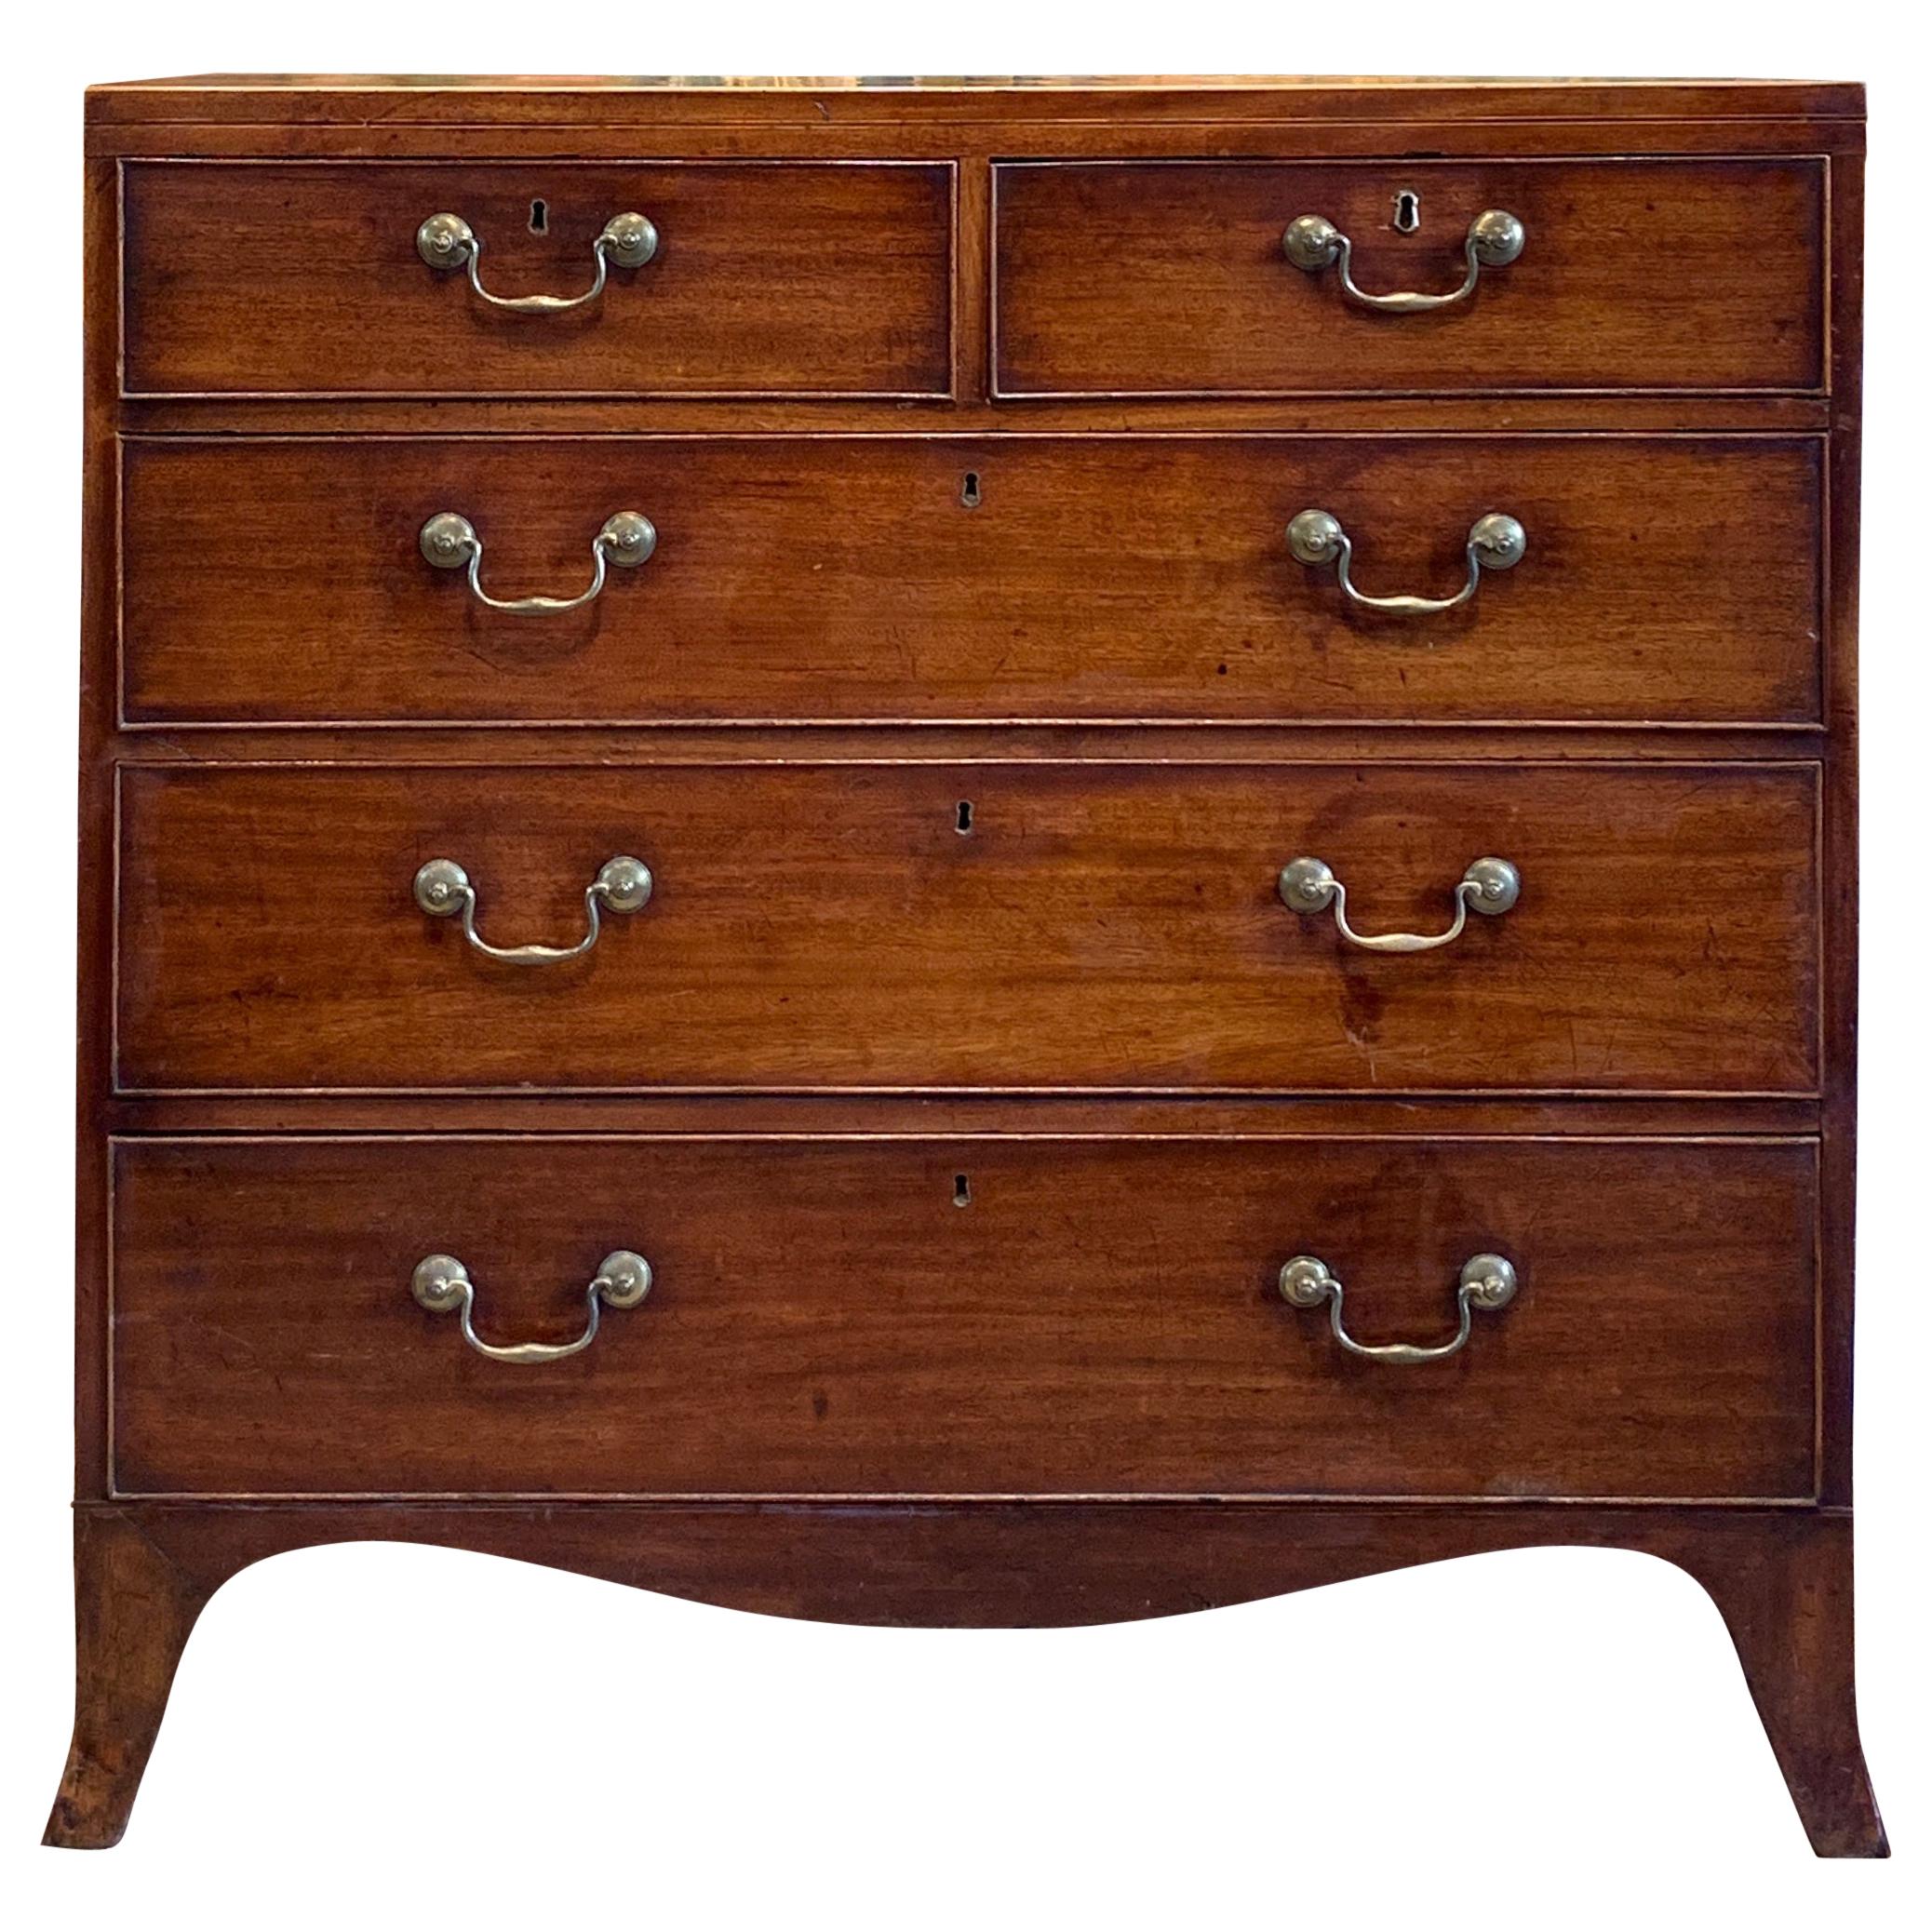 Early 19th Century English Mahogany Chest of Drawers